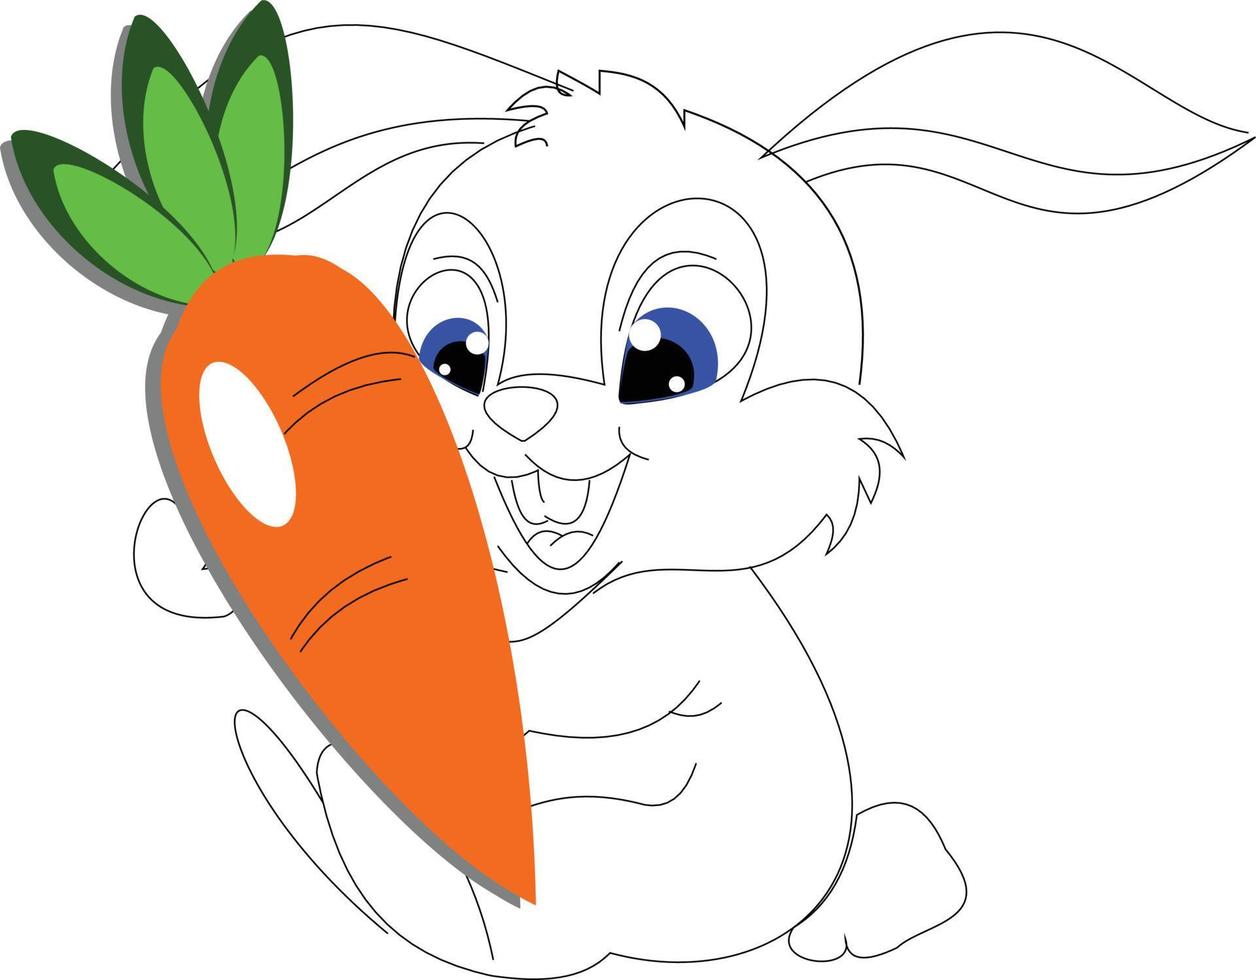 Art  Illustration A cute rabbit with cute smile and orange carrotrabbit vector